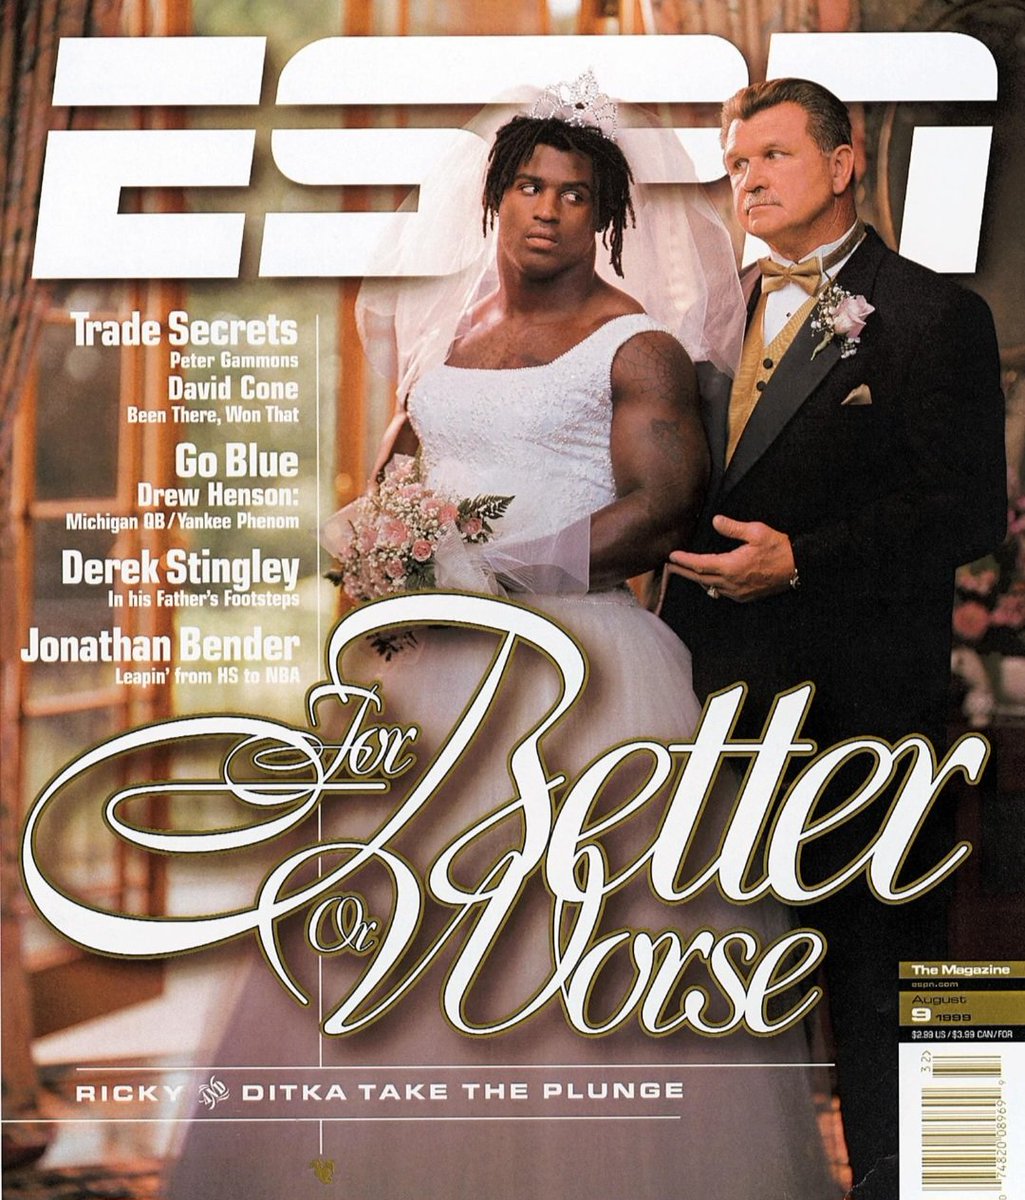 @Vision4theBlind They started all of this at least as far back as 1999 with Ricky Williams on the cover of ESPN